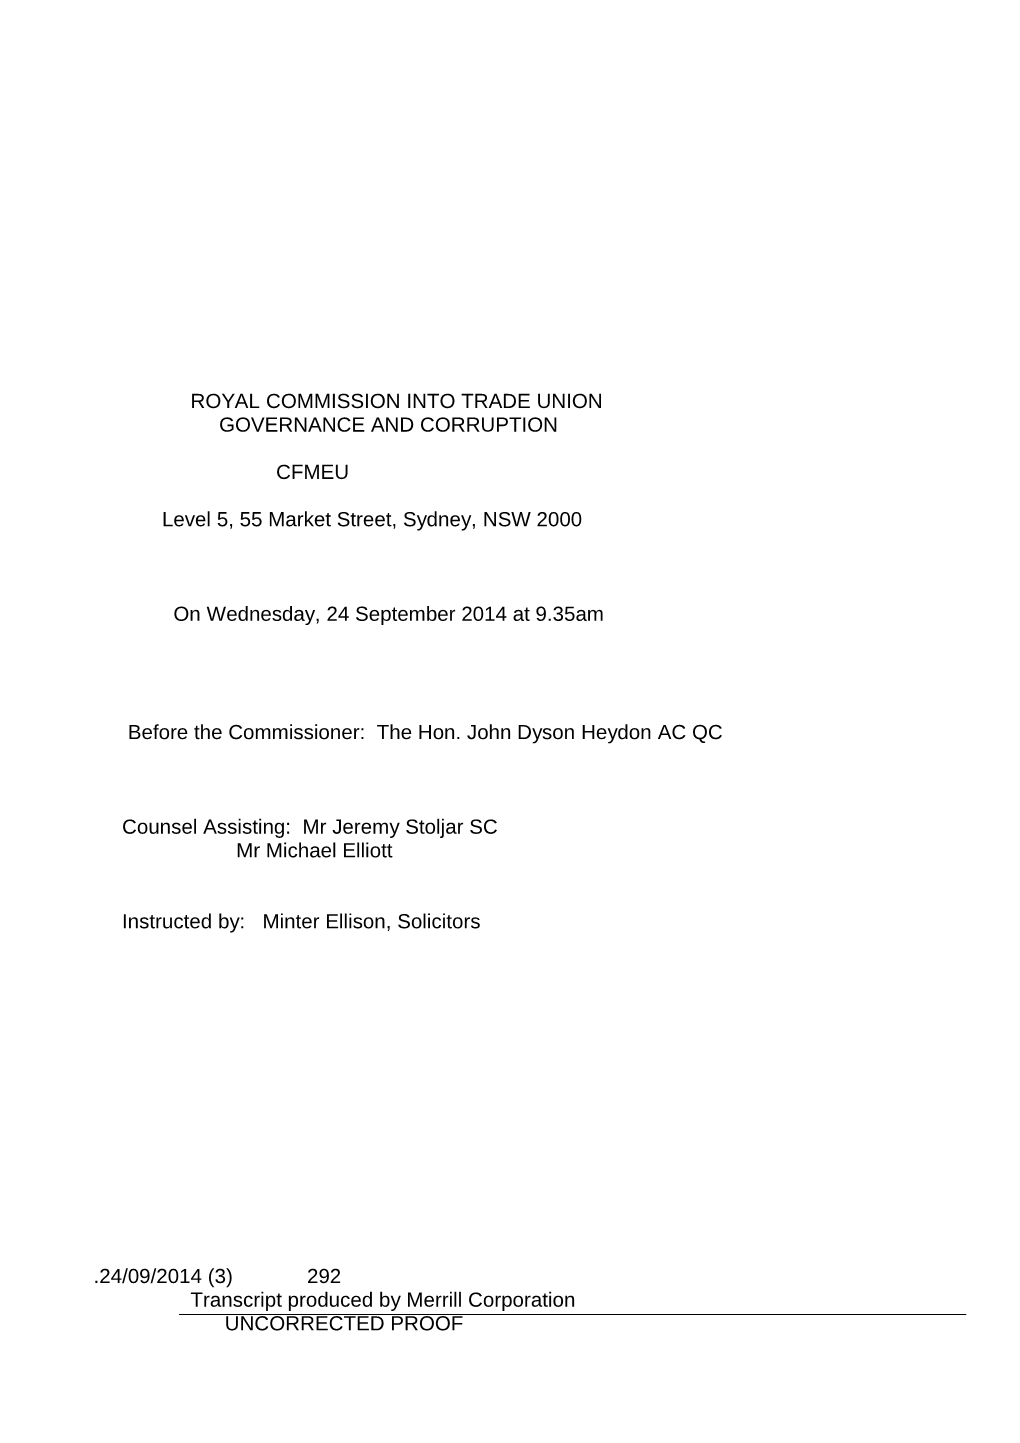 Royal Commission Into Trade Union Governance and Corruption, Transcript, 24 September 2014